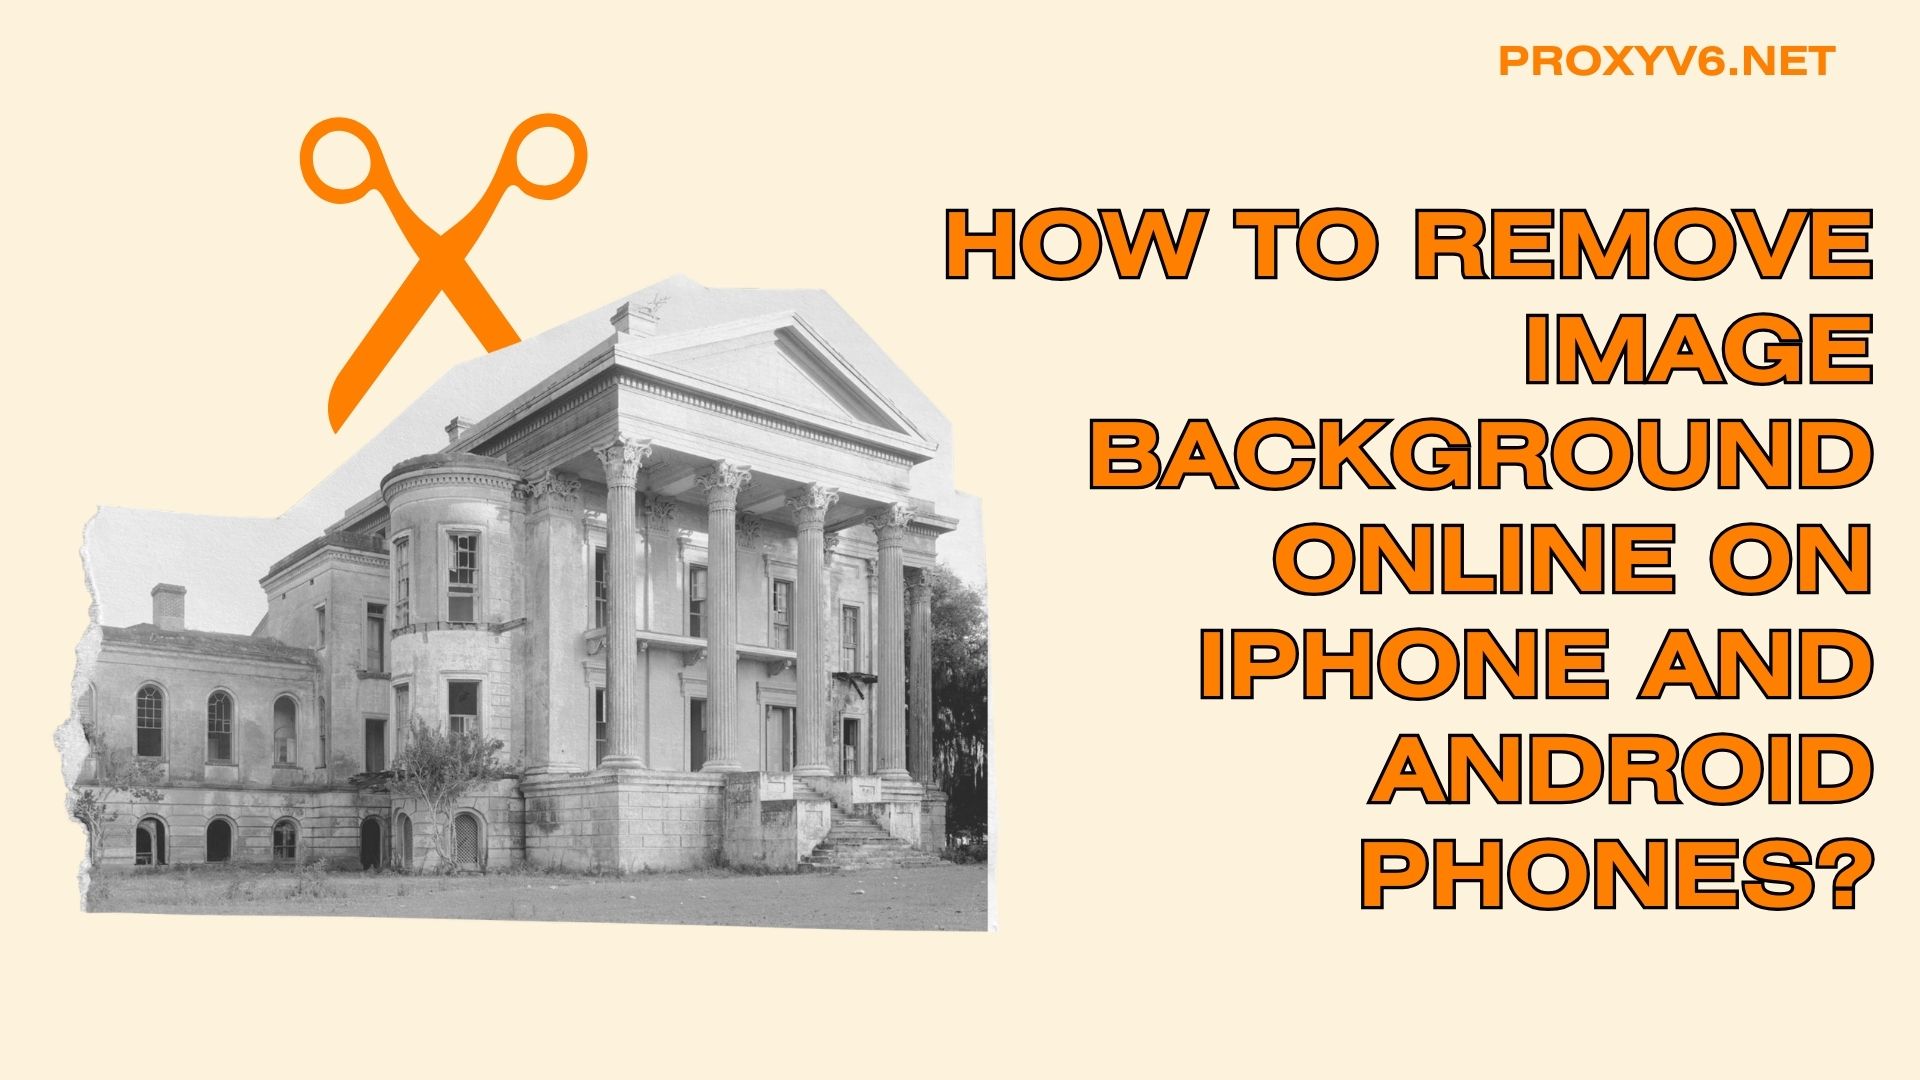 How to remove image background online on iPhone and Android phones?